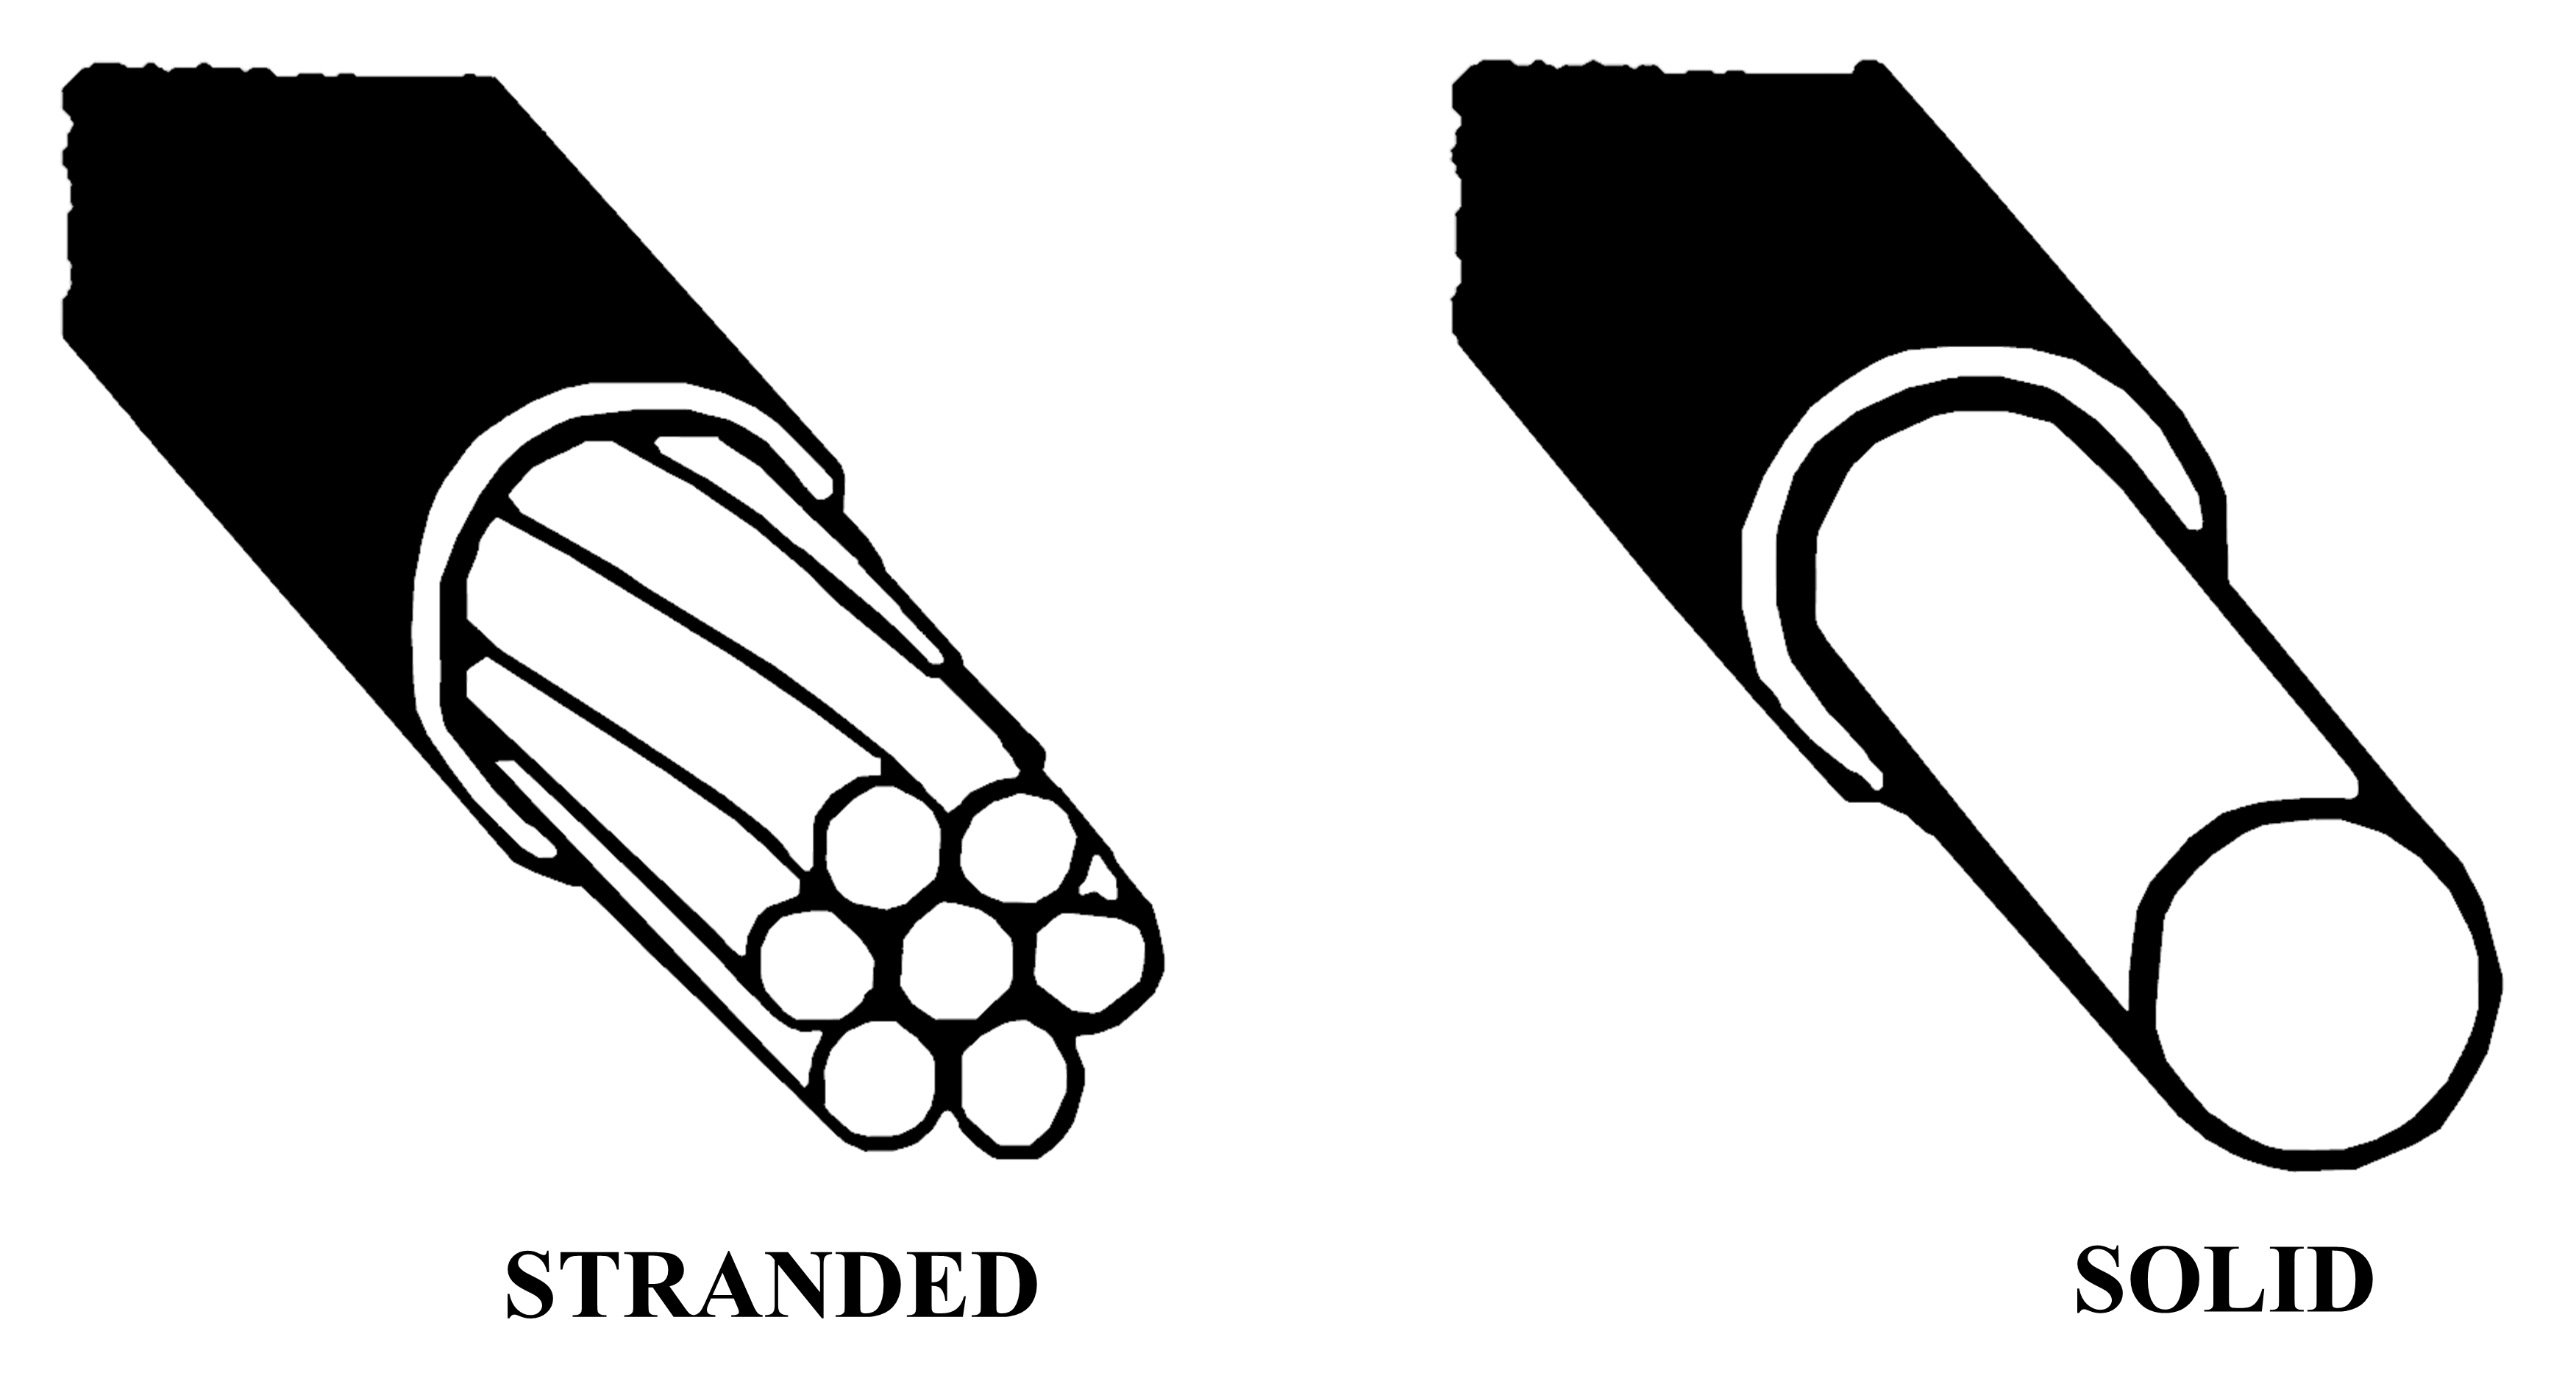 A diagram with two wires showing a Stranded and solid conductor.